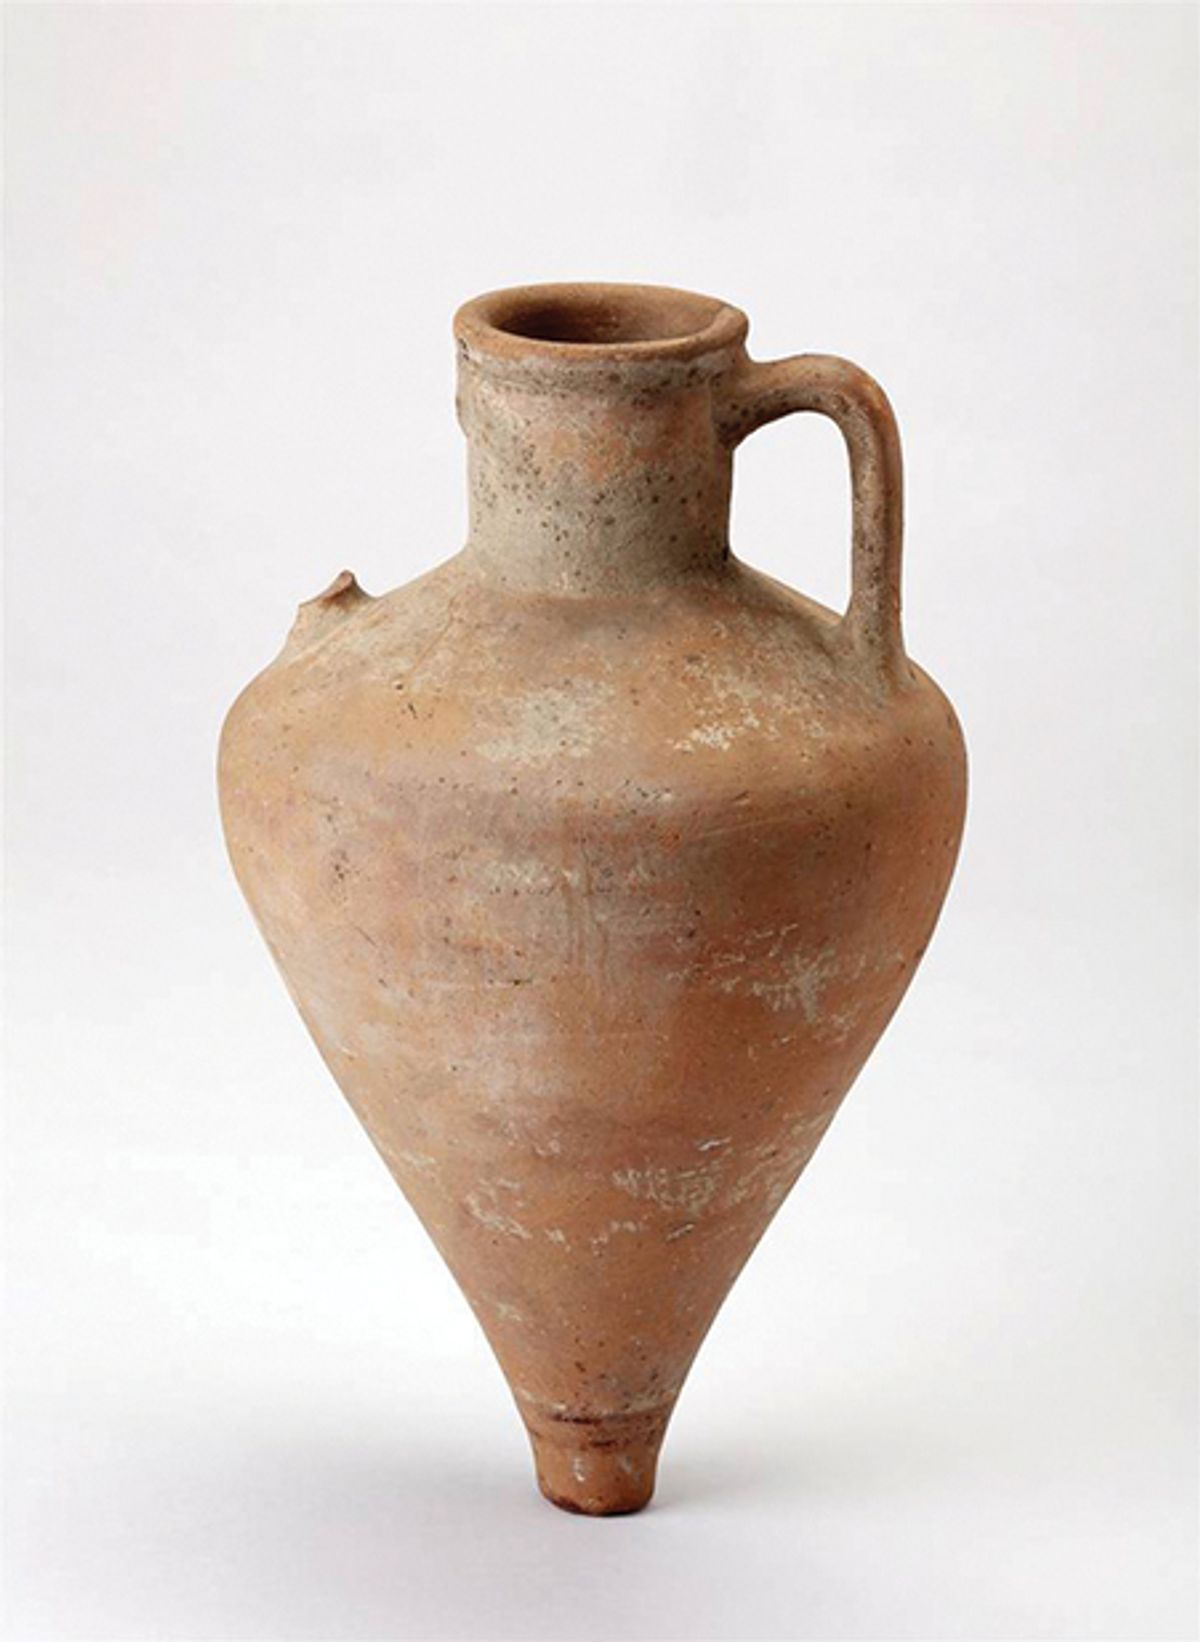 Three amphorae are among the artefacts being returned to the historical museum in Temryuk © Salzburg Museum